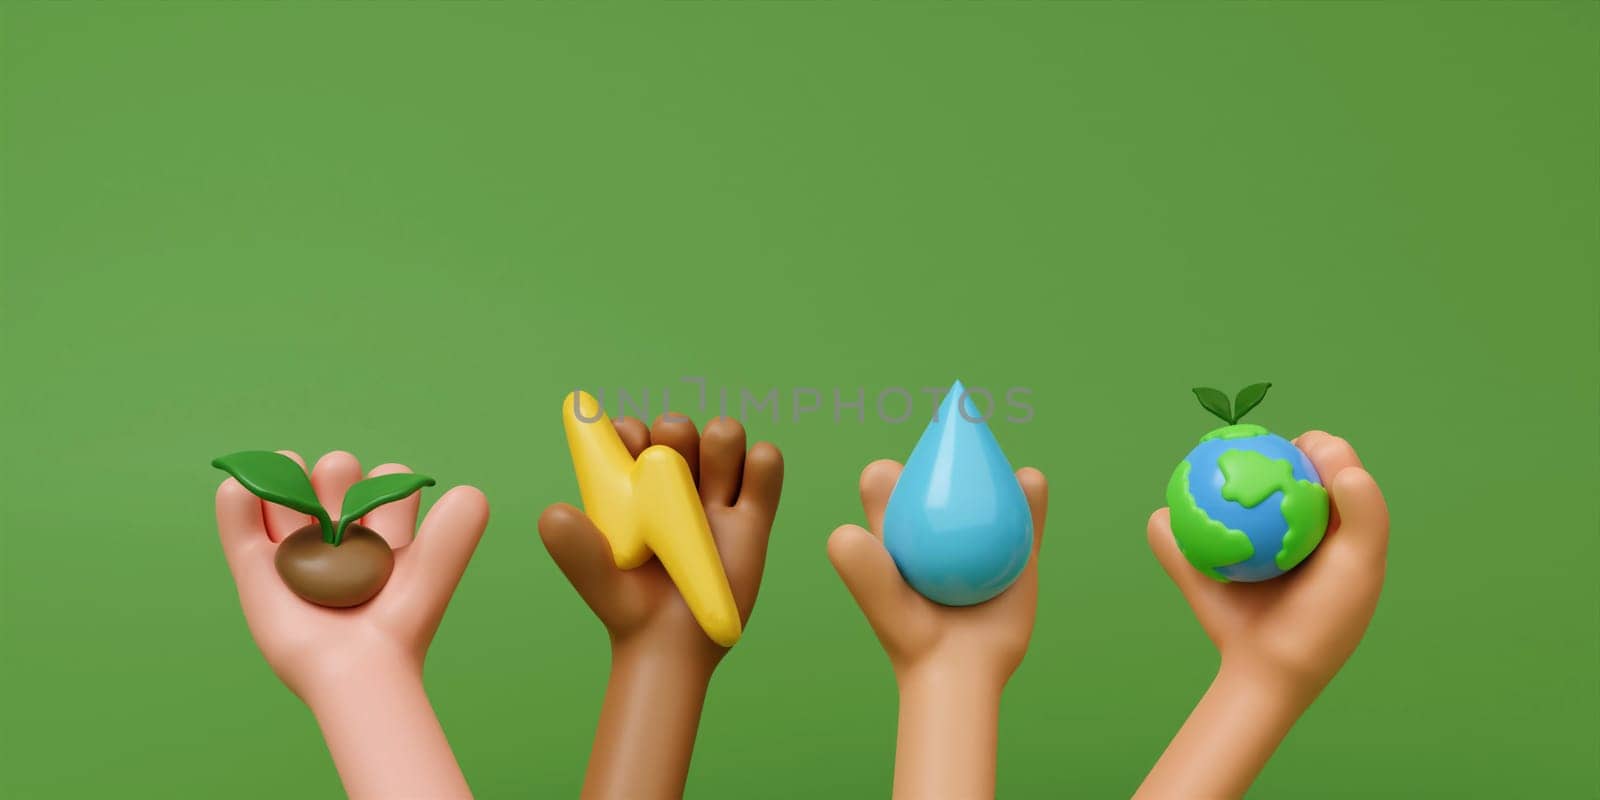 3d hand hold plan, thunder, water, earth on green background. Concept of Save the Earth, Protect environmental and eco green life, ecology and nature protect. 3d rendering illustration. by meepiangraphic